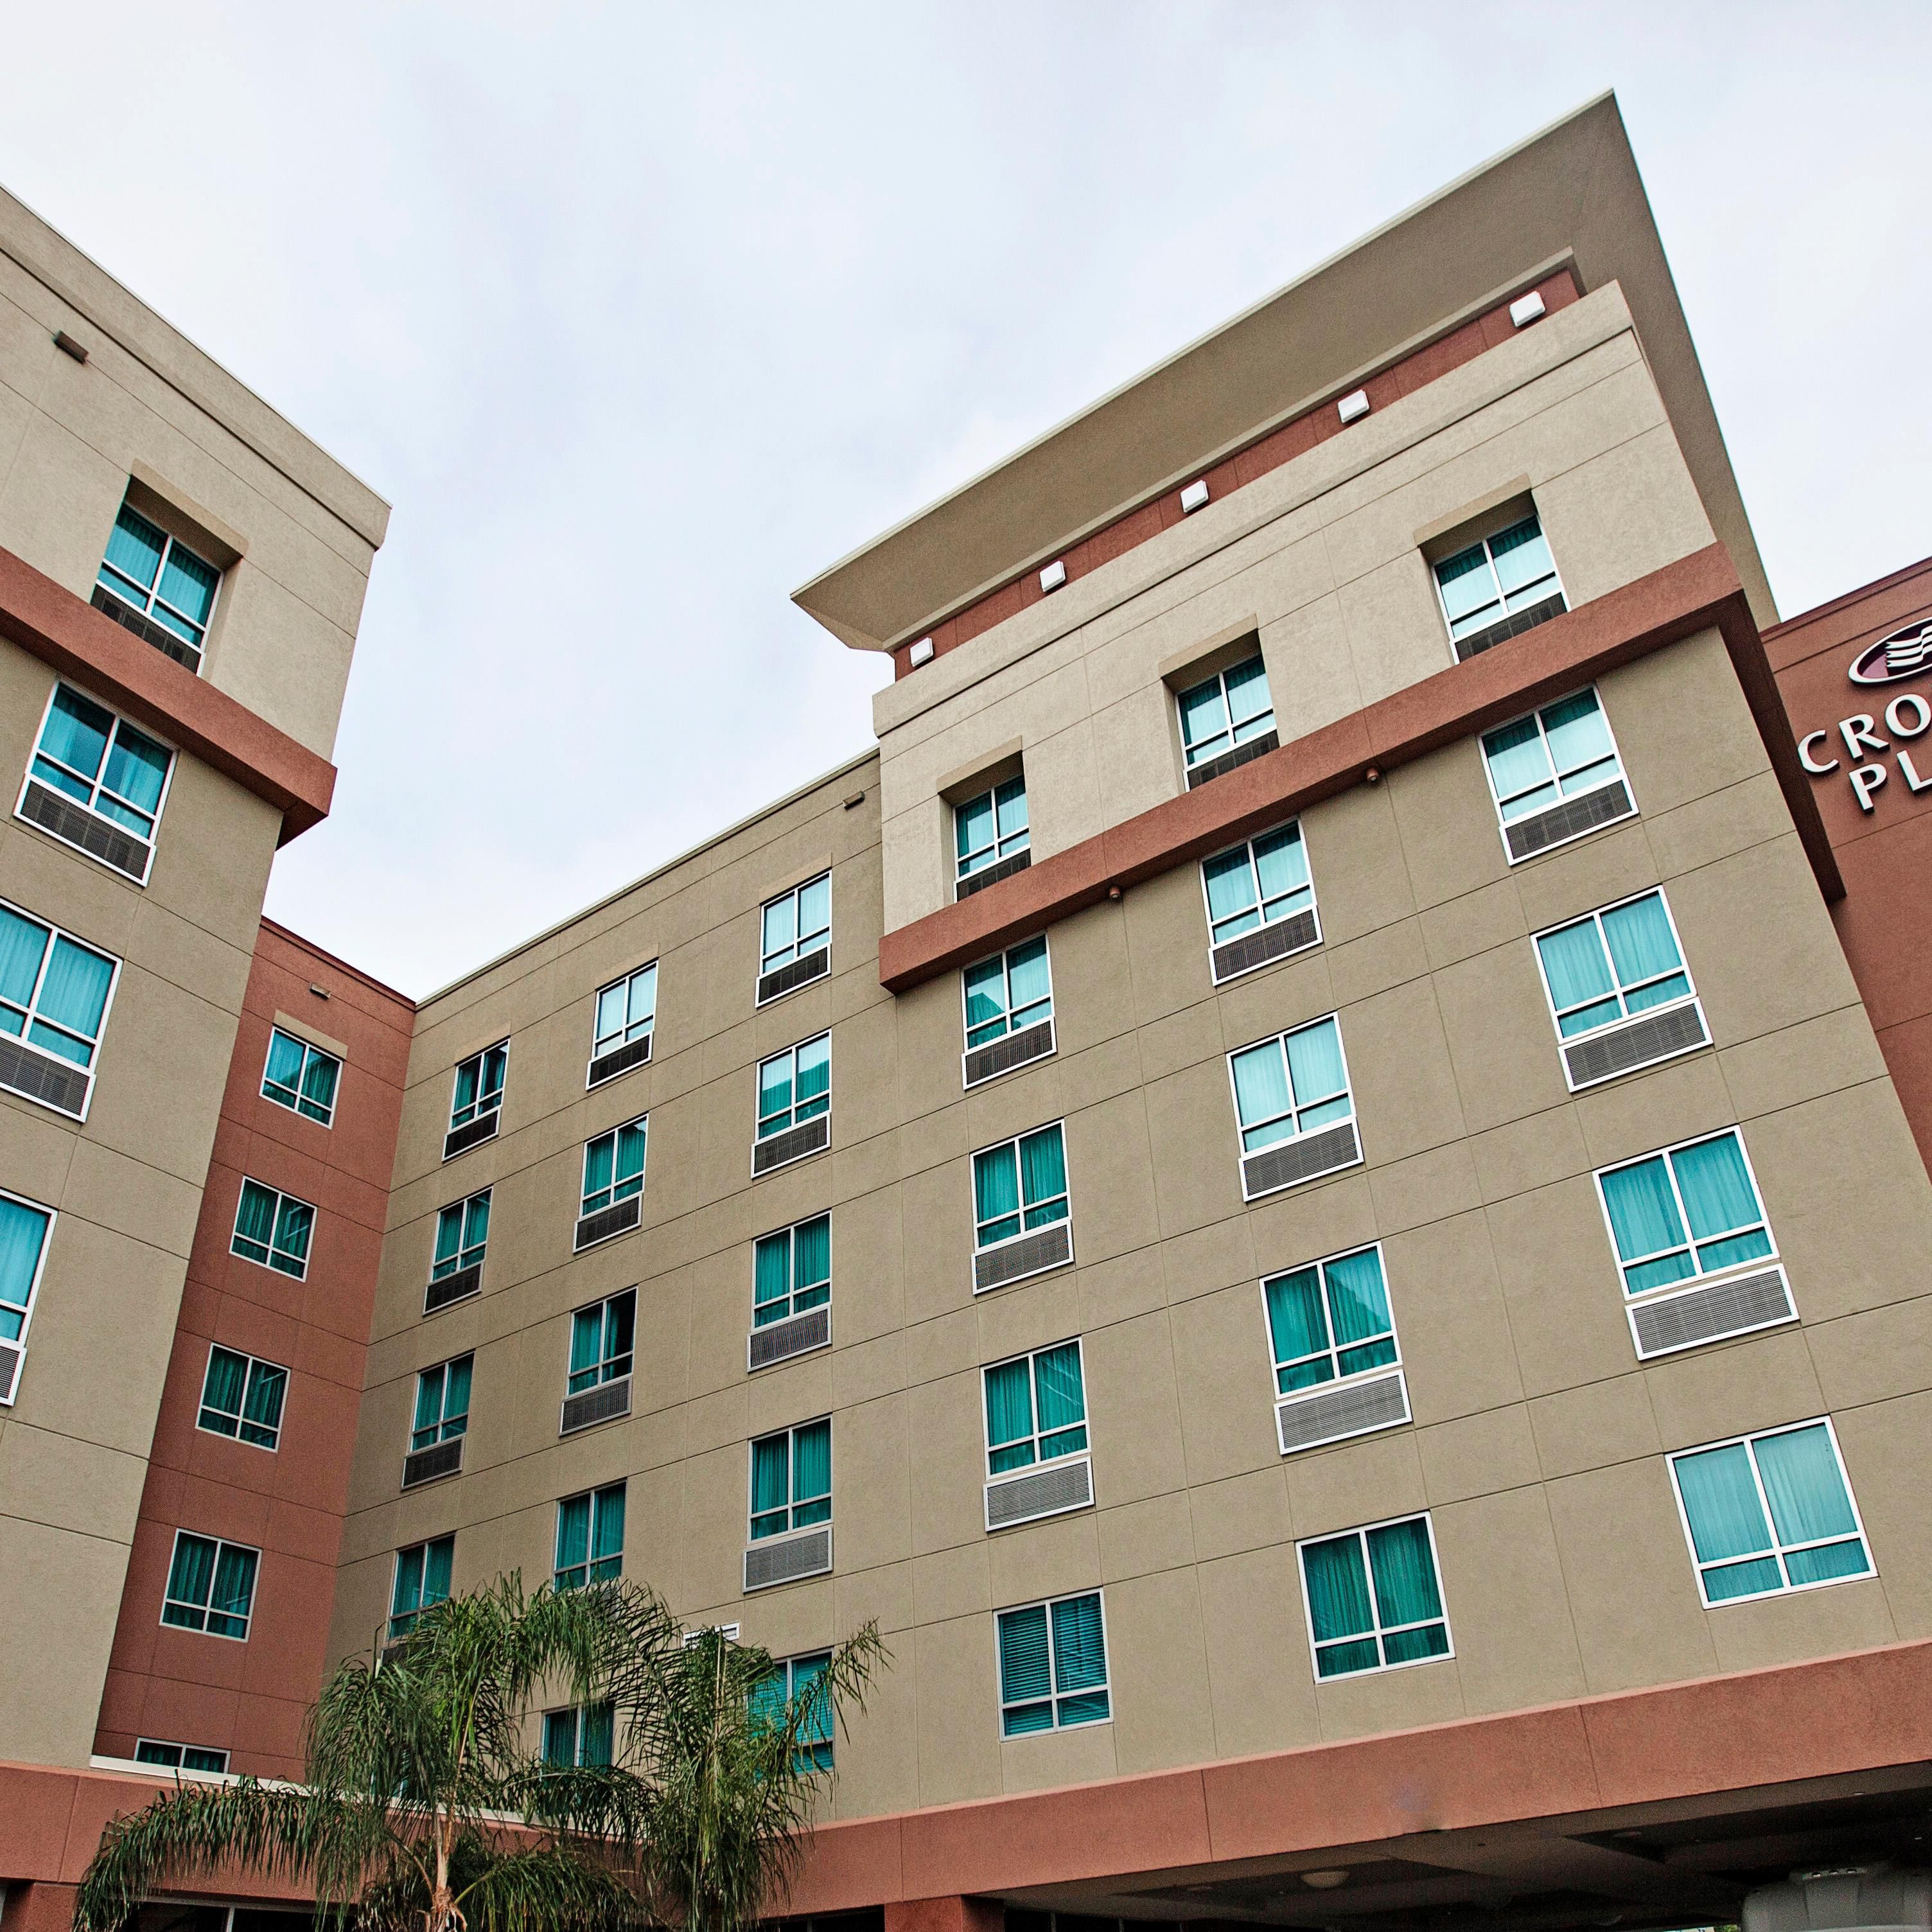 Stay at the Crowne Plaza Houston Hotel near the Galleria